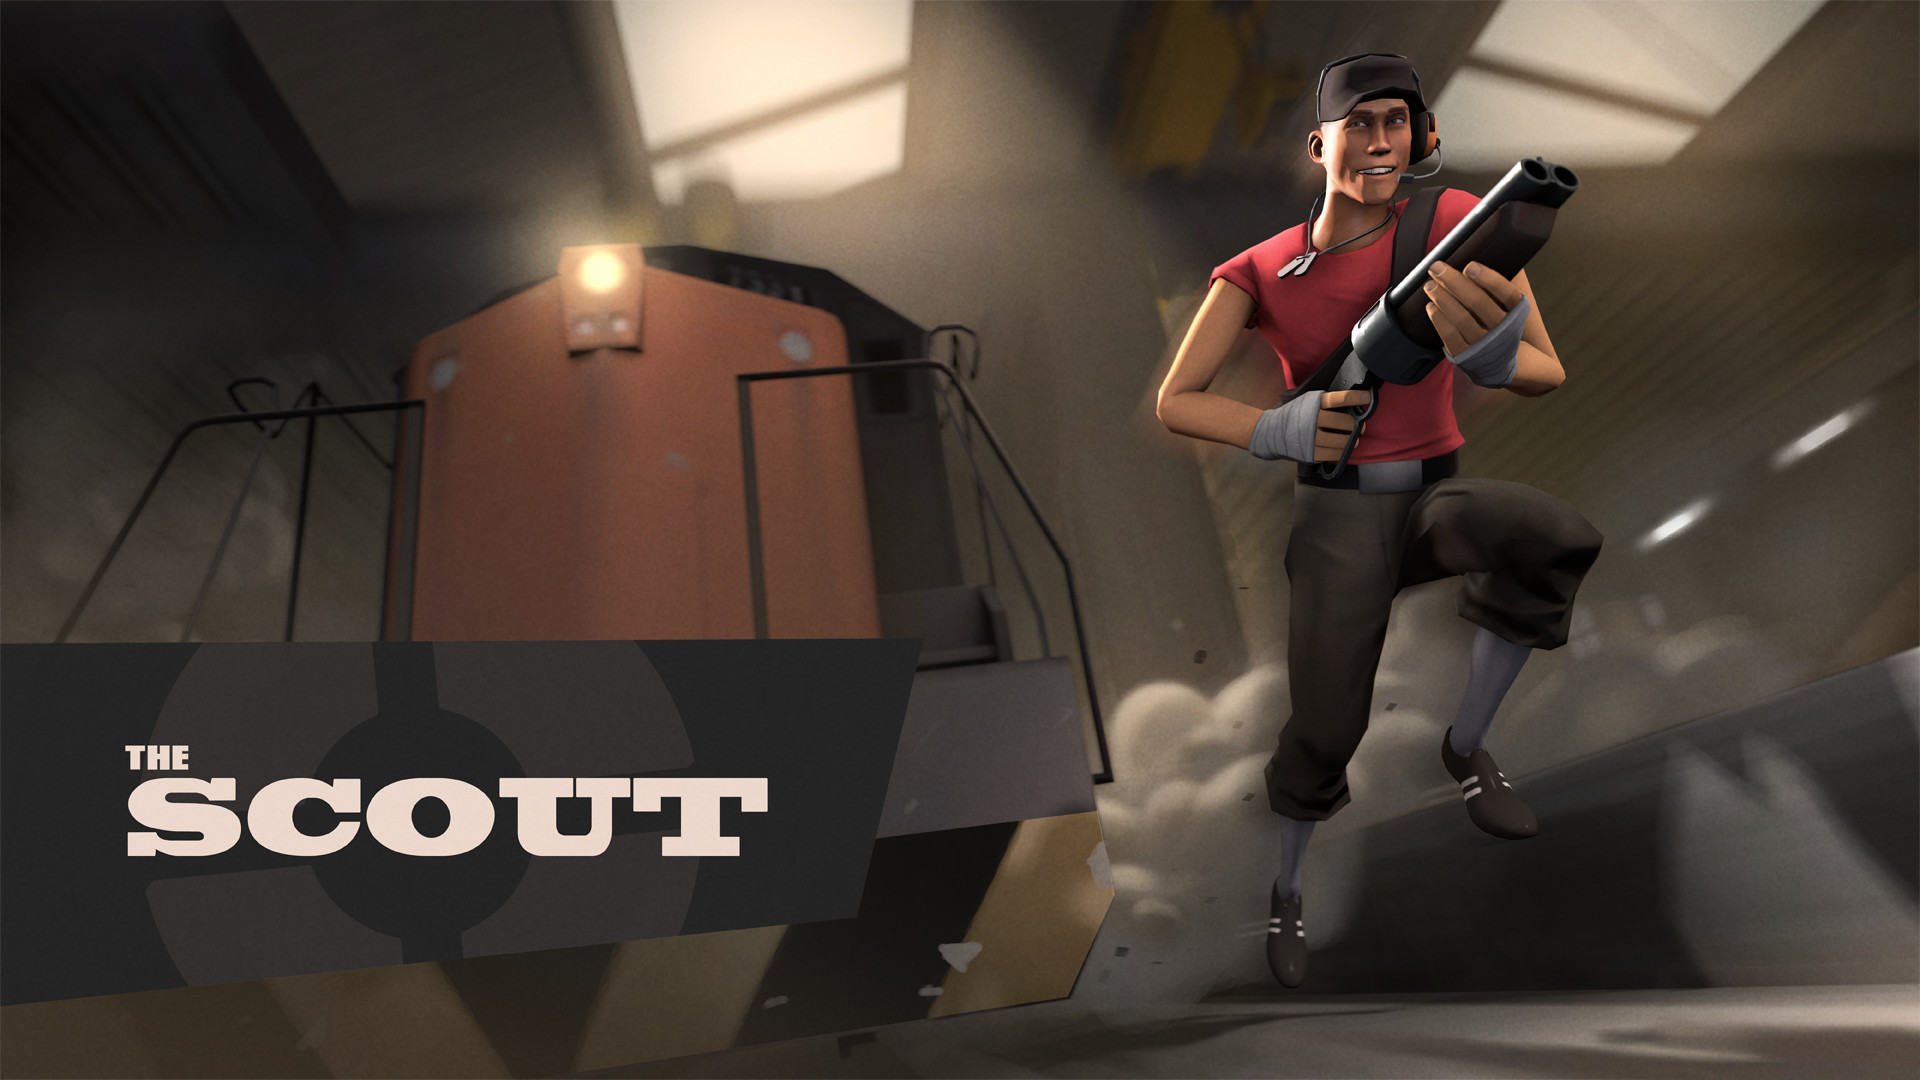 1920x1080 Heres the scout one :  http://media.steampowered.com/steamcommunity/public/images/items/440/8770a2cbee93c5d5ef04d5490060dd2b1dd94a9e.png